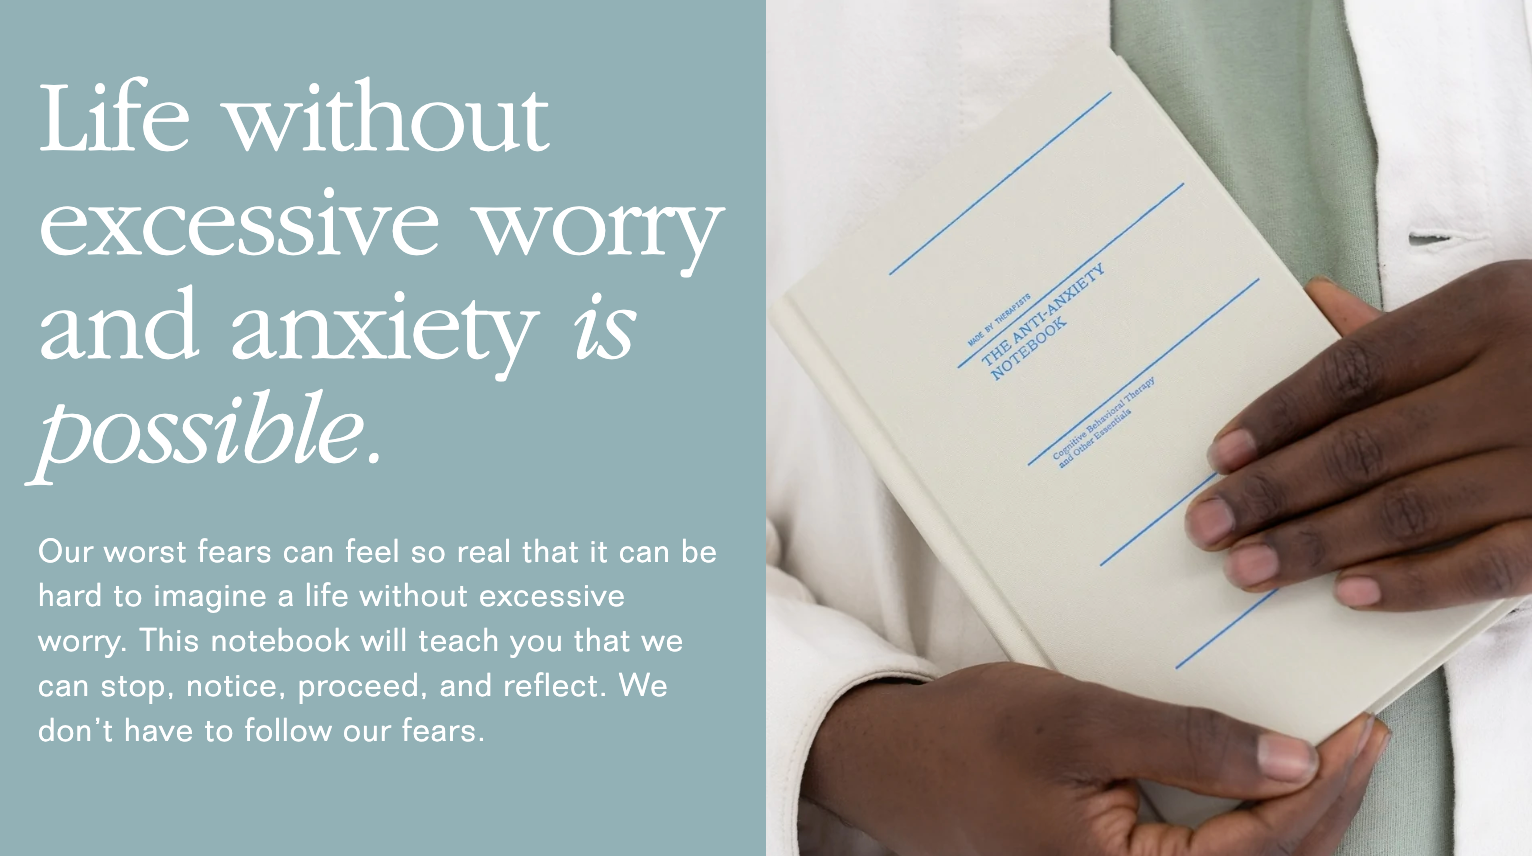 The Anti-Anxiety Notebook, Therapy In Your Pocket